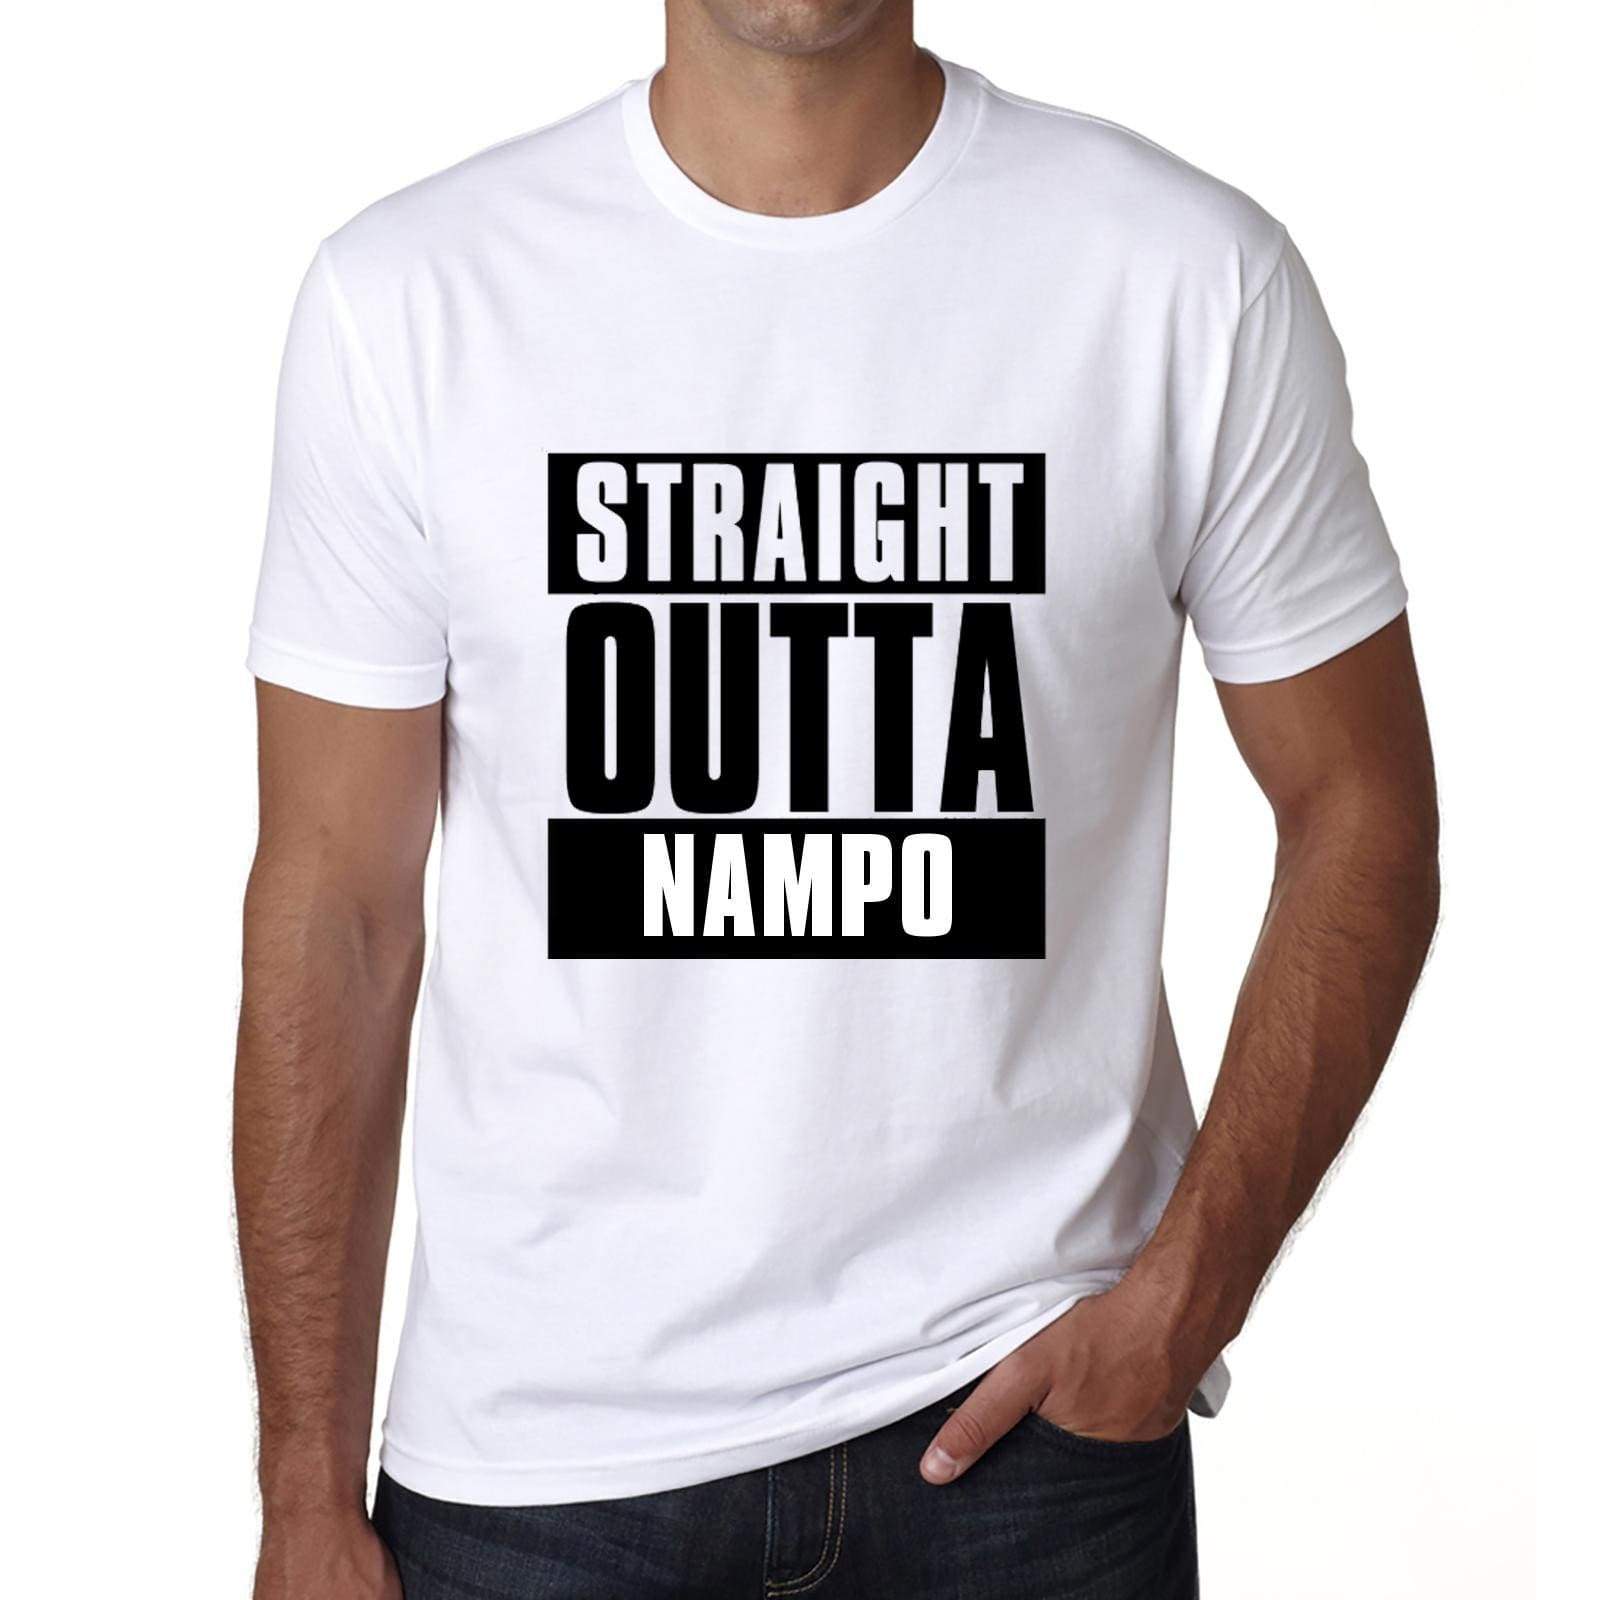 Straight Outta Nampo Mens Short Sleeve Round Neck T-Shirt 00027 - White / S - Casual